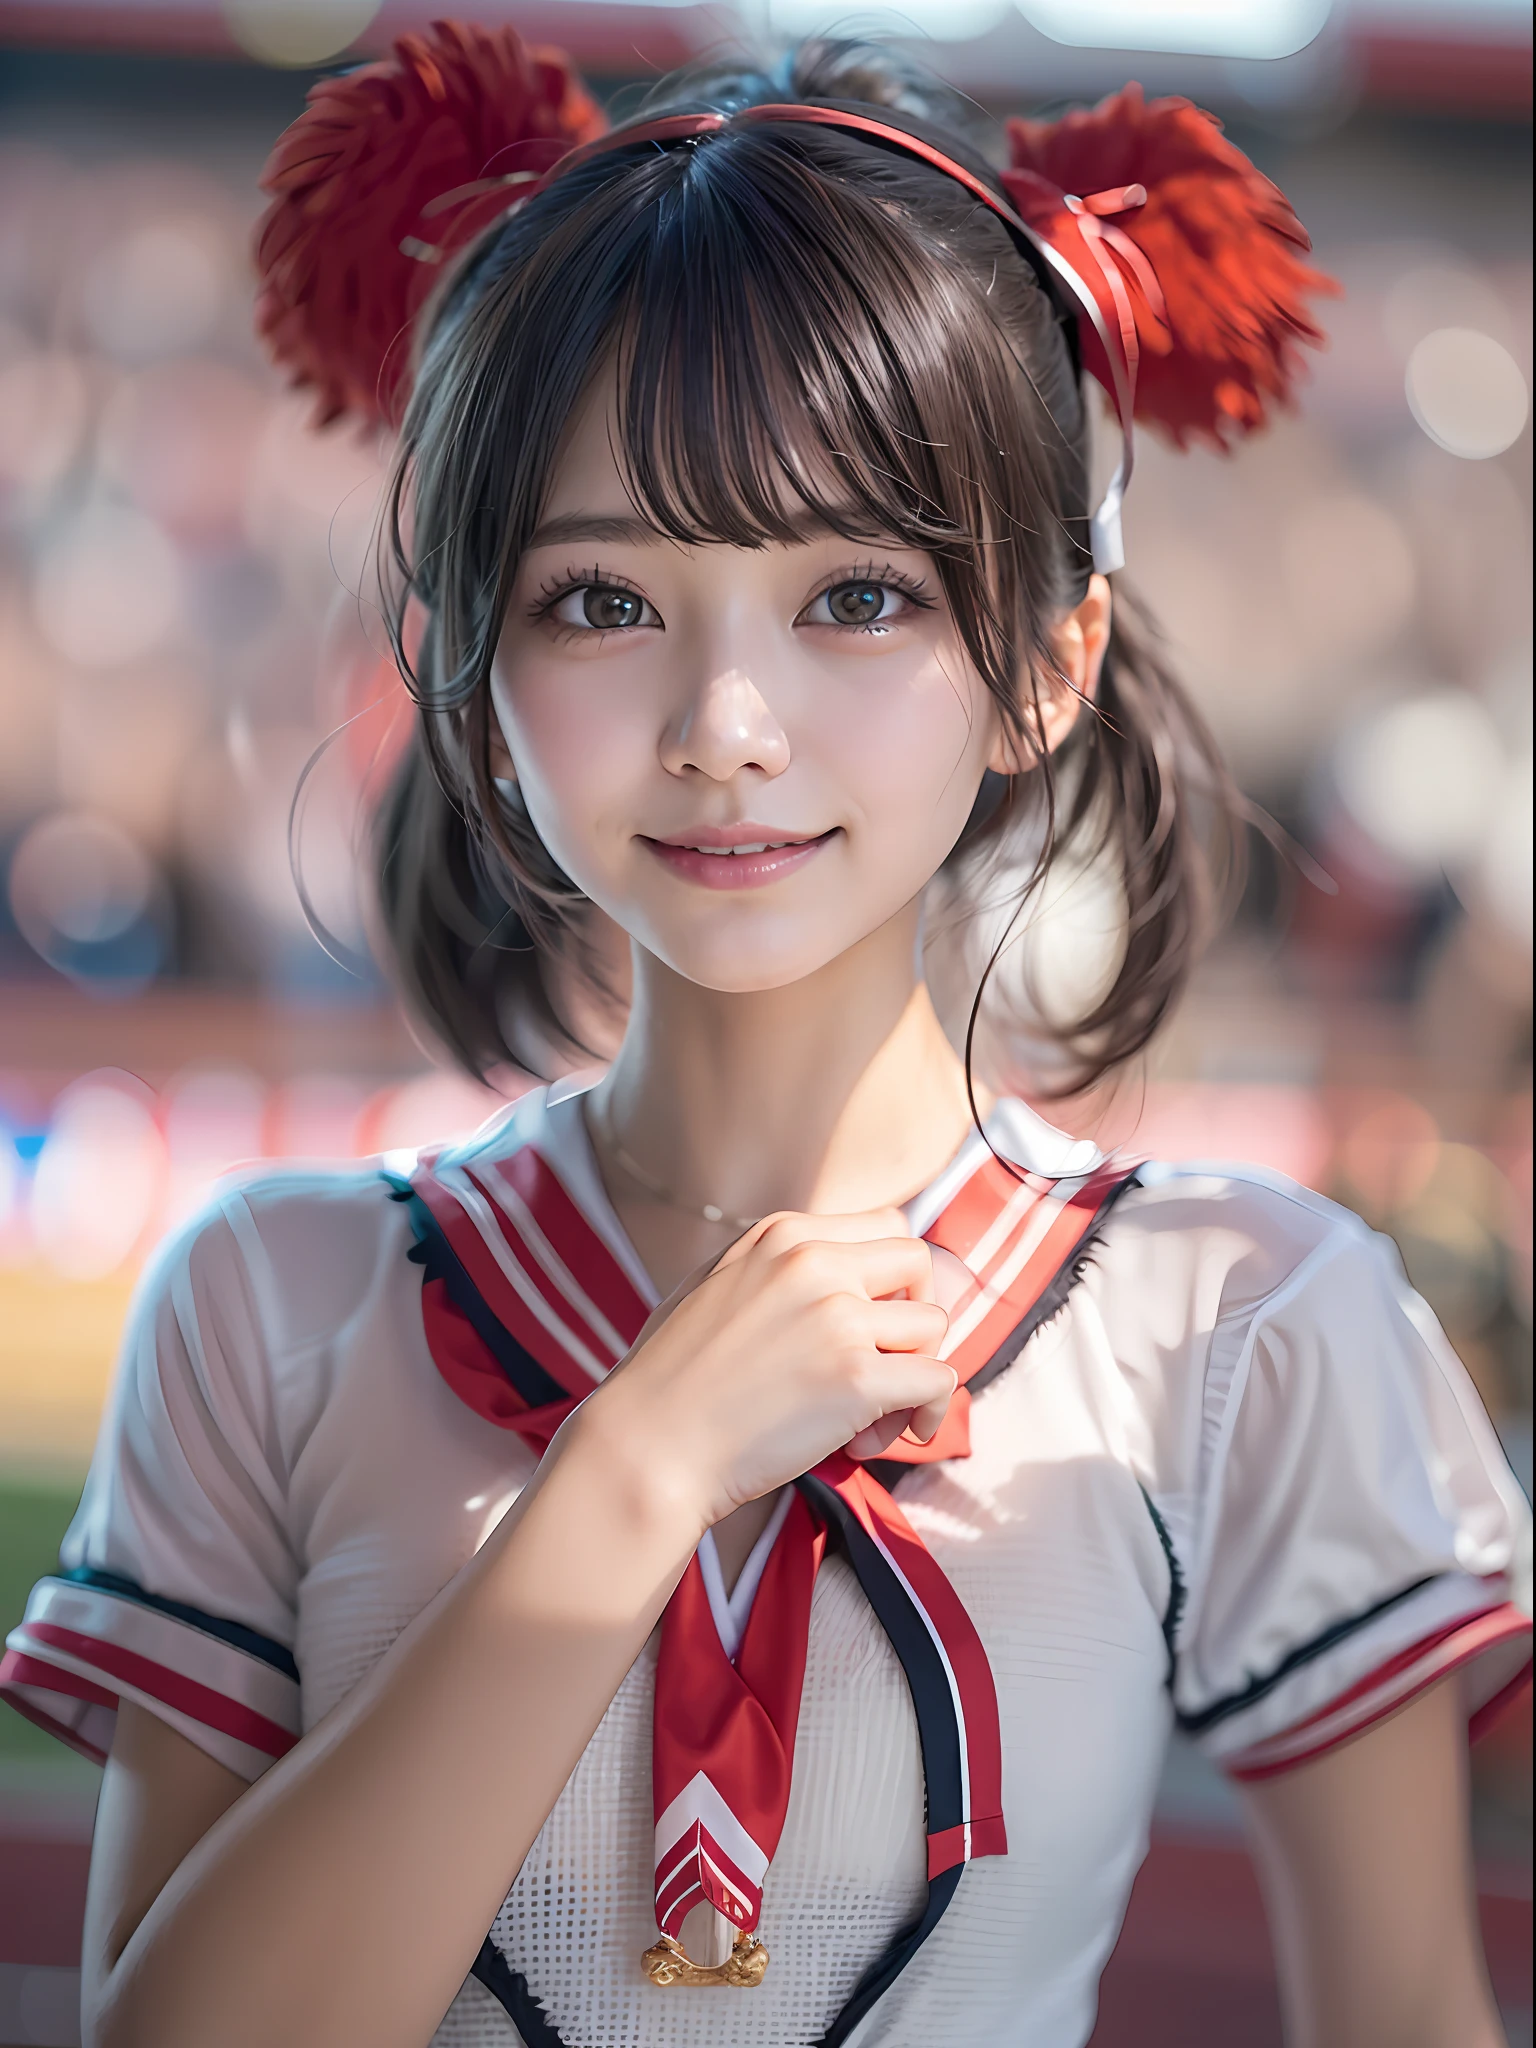 Holding a pom-pom in the stadium、Alafed Asian cheerleader posing dynamically with one leg raised:1 person:there is nobody else、A darK-haired、a closeup、cosplay foto、large full breasts、Realistic 18-year-old live shot, top-quality, hight resolution, (​masterpiece), (Photorealsitic:1.4), professional photograpy, sharp focus, nffsw, 8K resolution, intricate detailes,  depth of fields, the Extremely Detailed CG Unity 8K Wallpapers, front lit, FEMALES, girl with, beautiful supermodel, A smile、A slender、Small Cheer Uniform、Sailor suit style